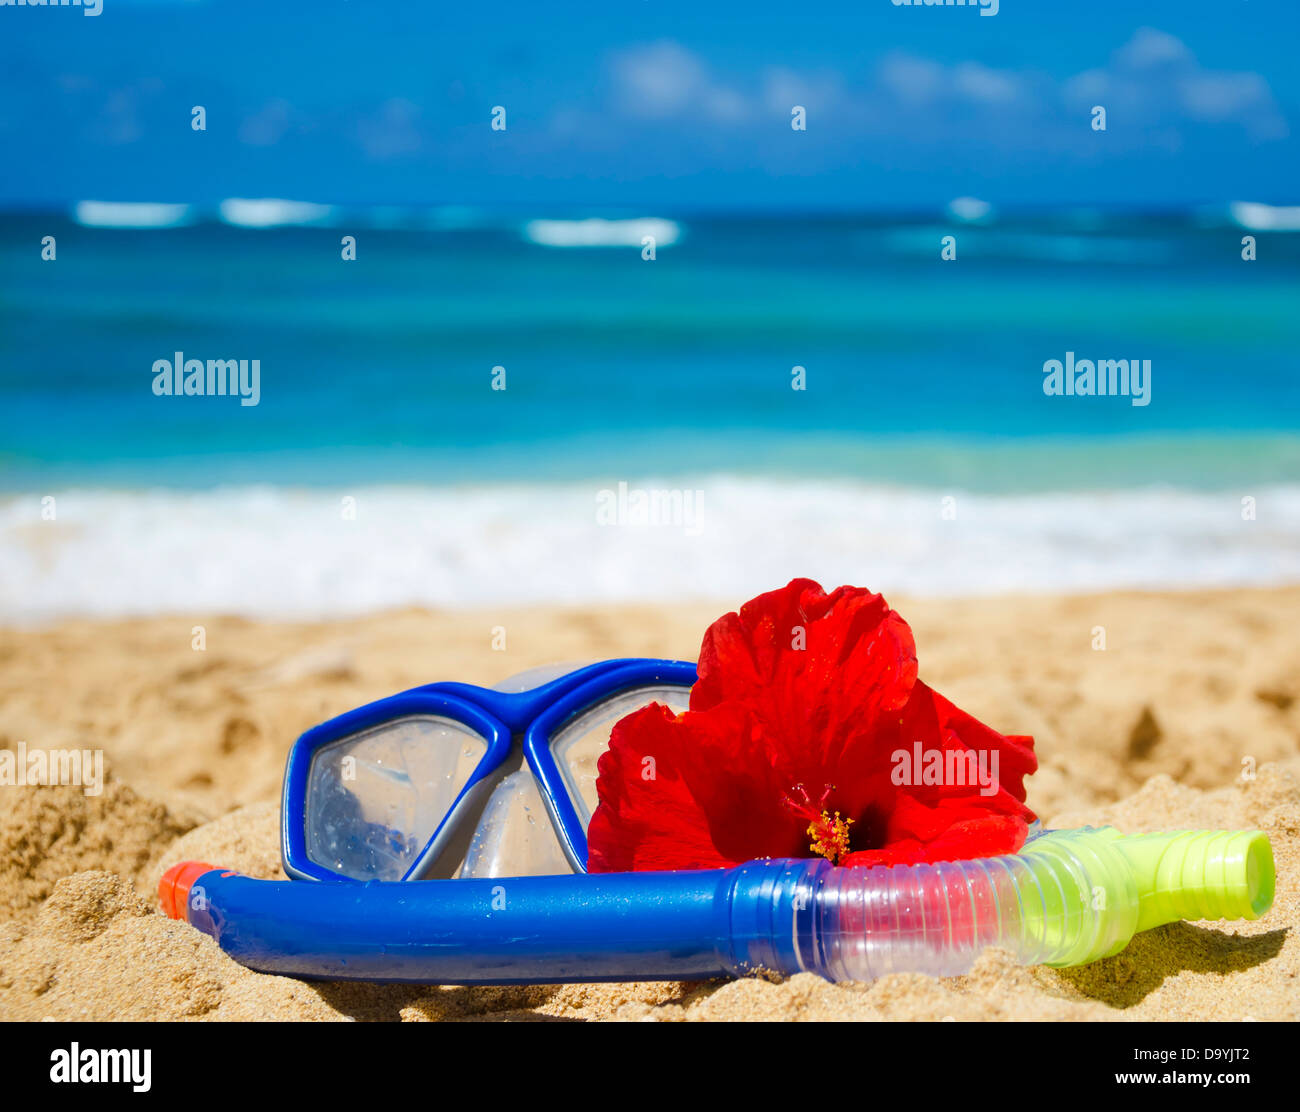 Snorkel and mask with tropical flower on sandy beach in Hawaii, Kauai Stock Photo